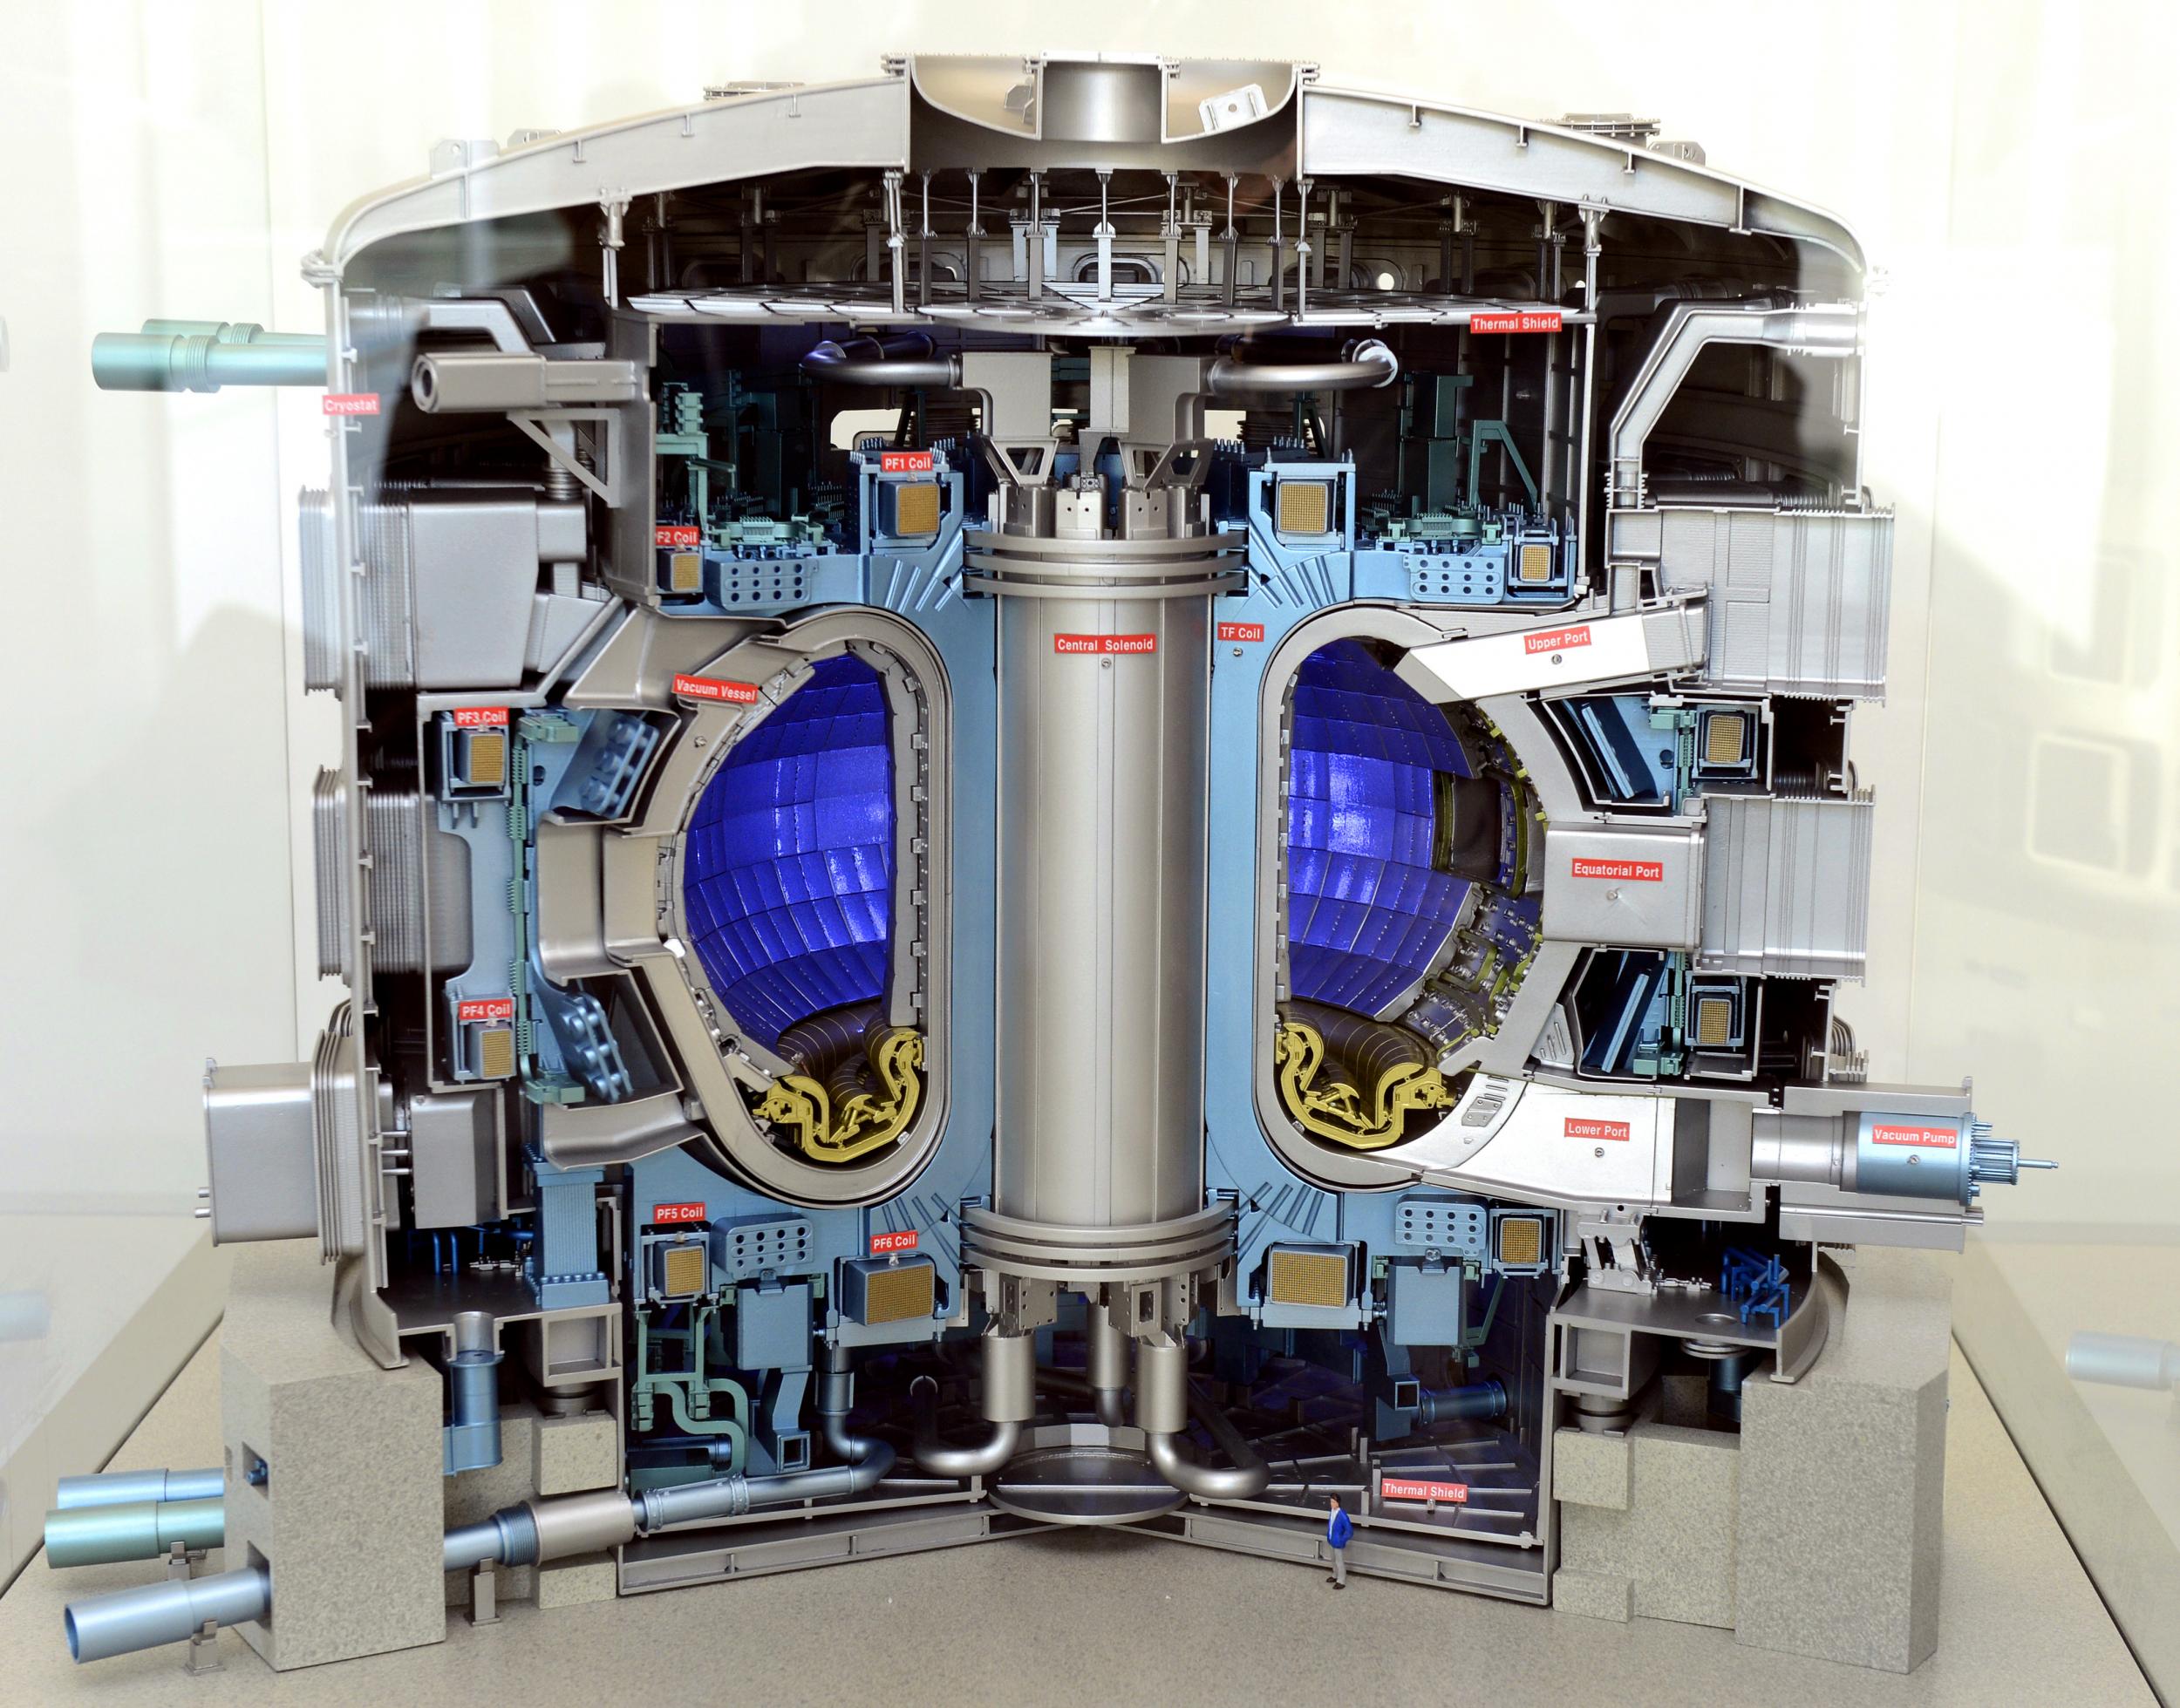 A model of the future Iter nuclear reactor that EuroFusion is helping to build